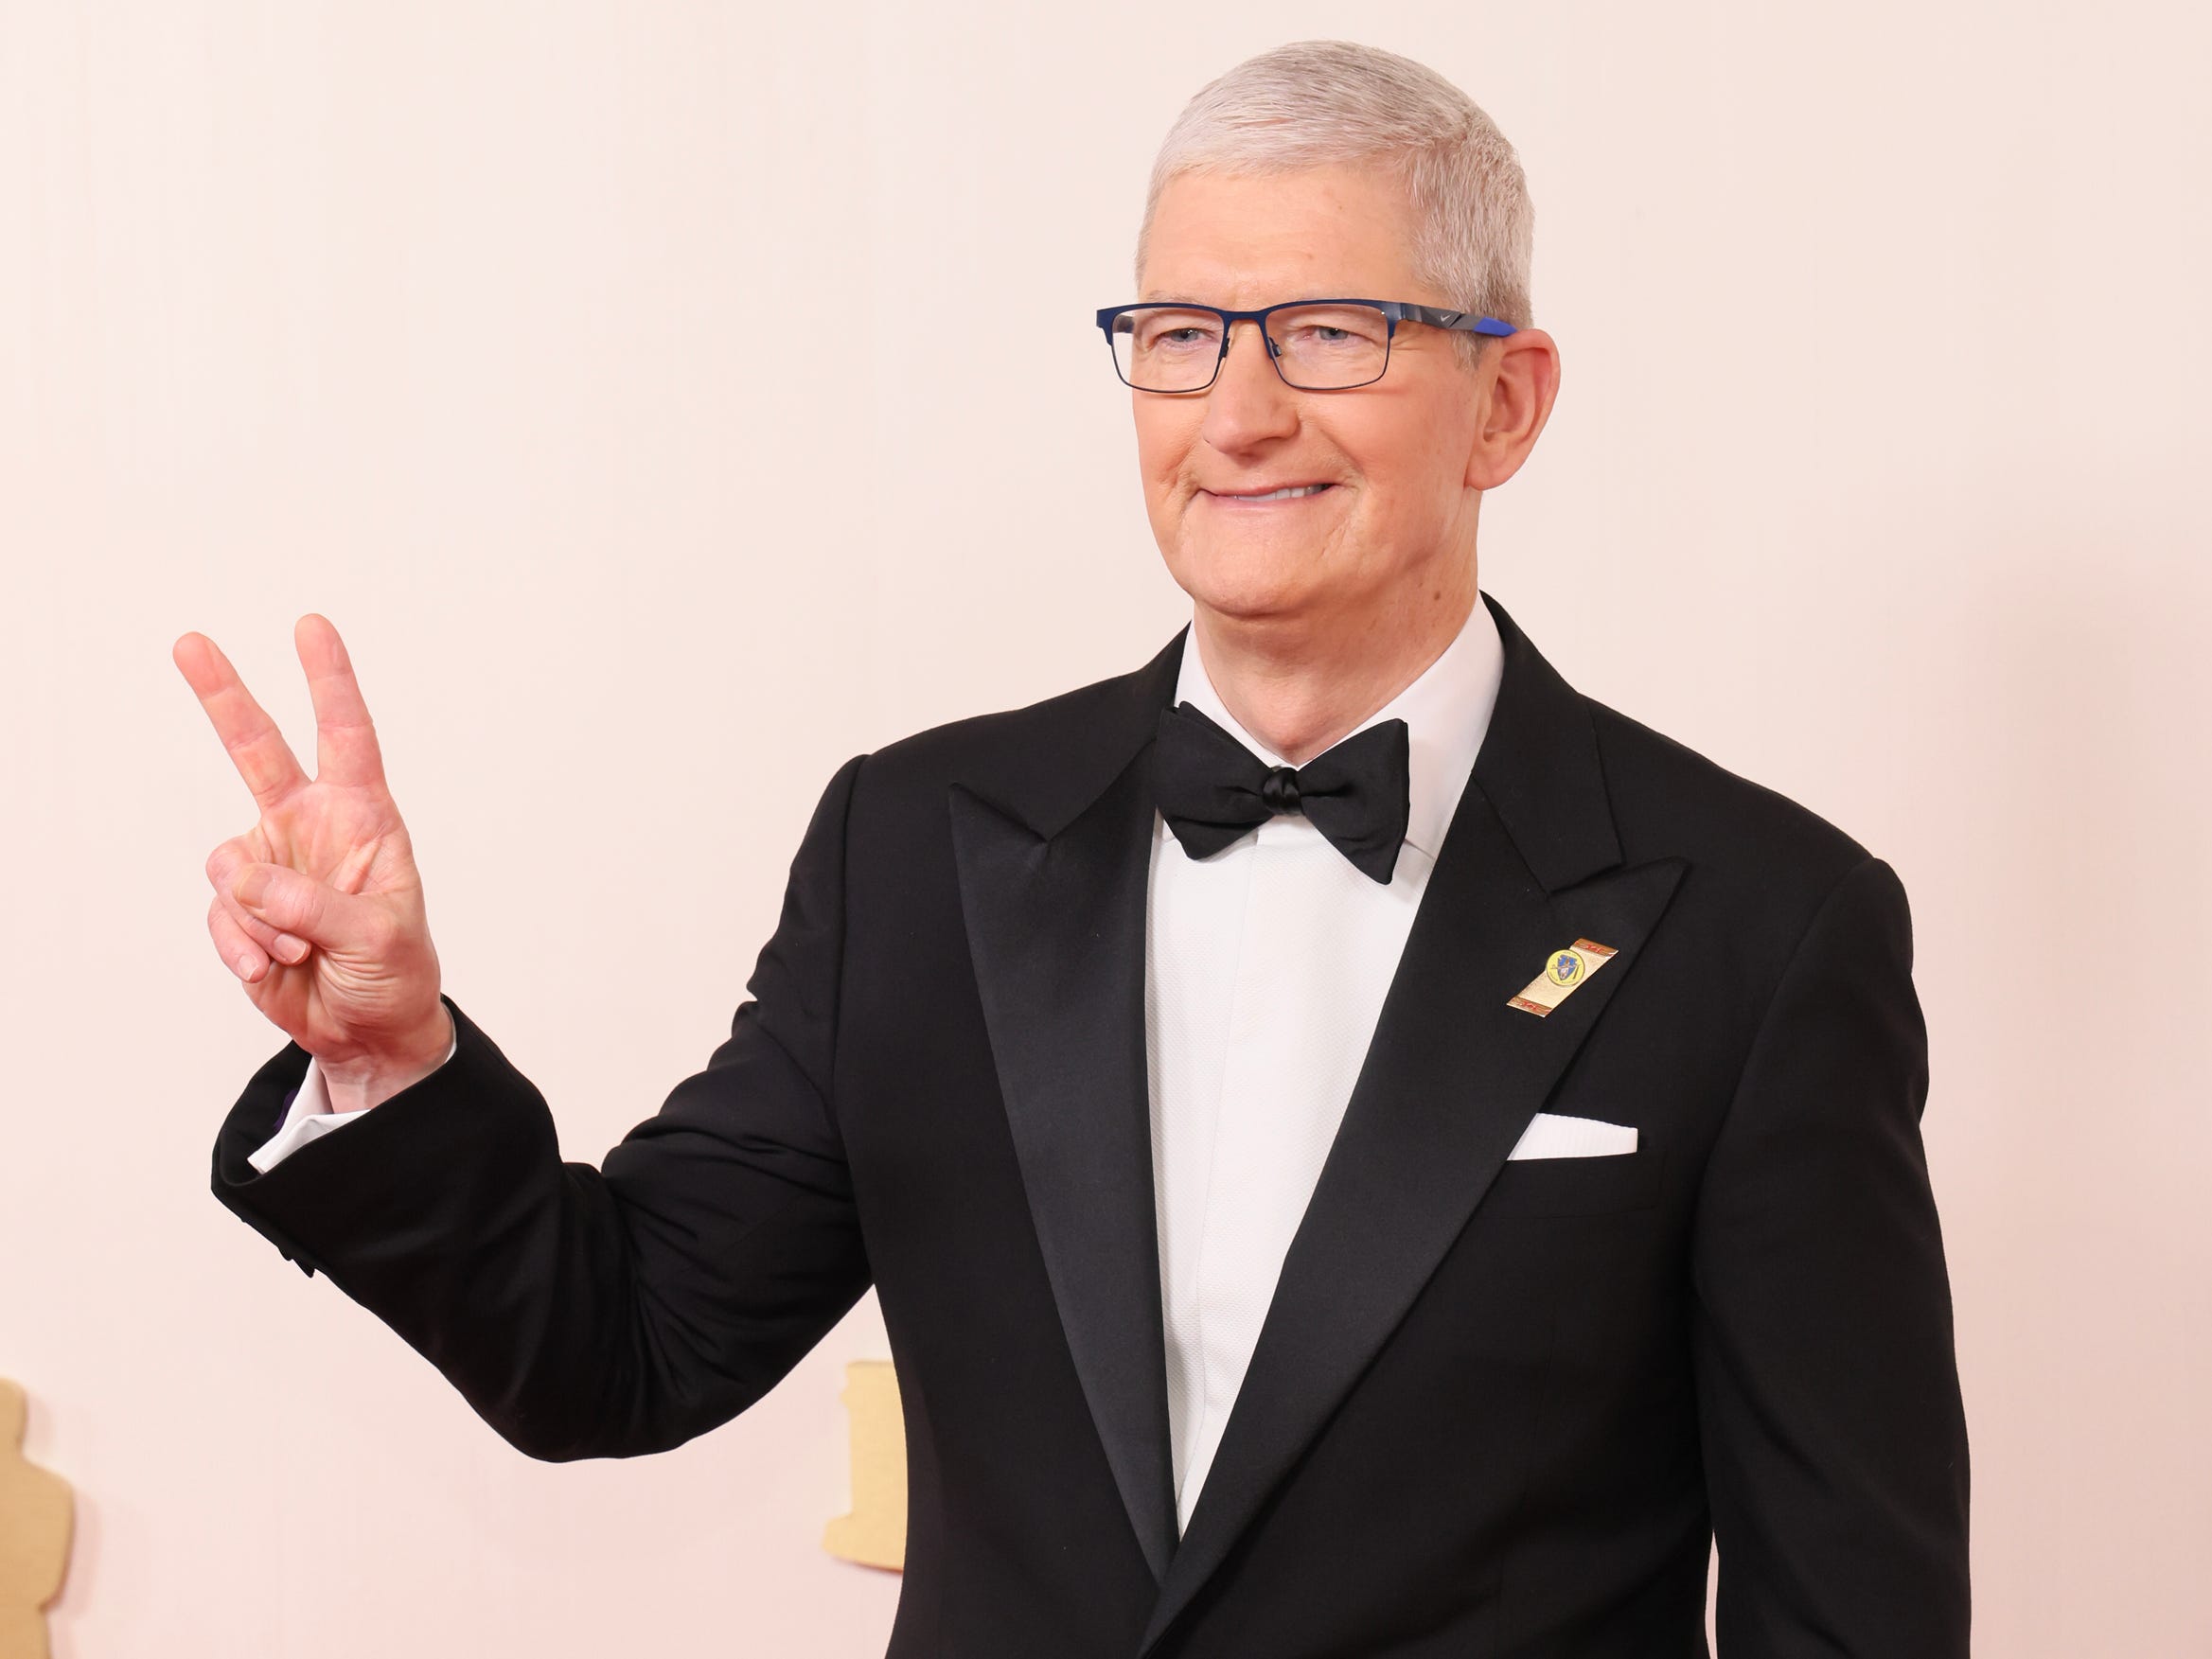 microsoft, apple ceo tim cook made $63 million last year — here's how that breaks down